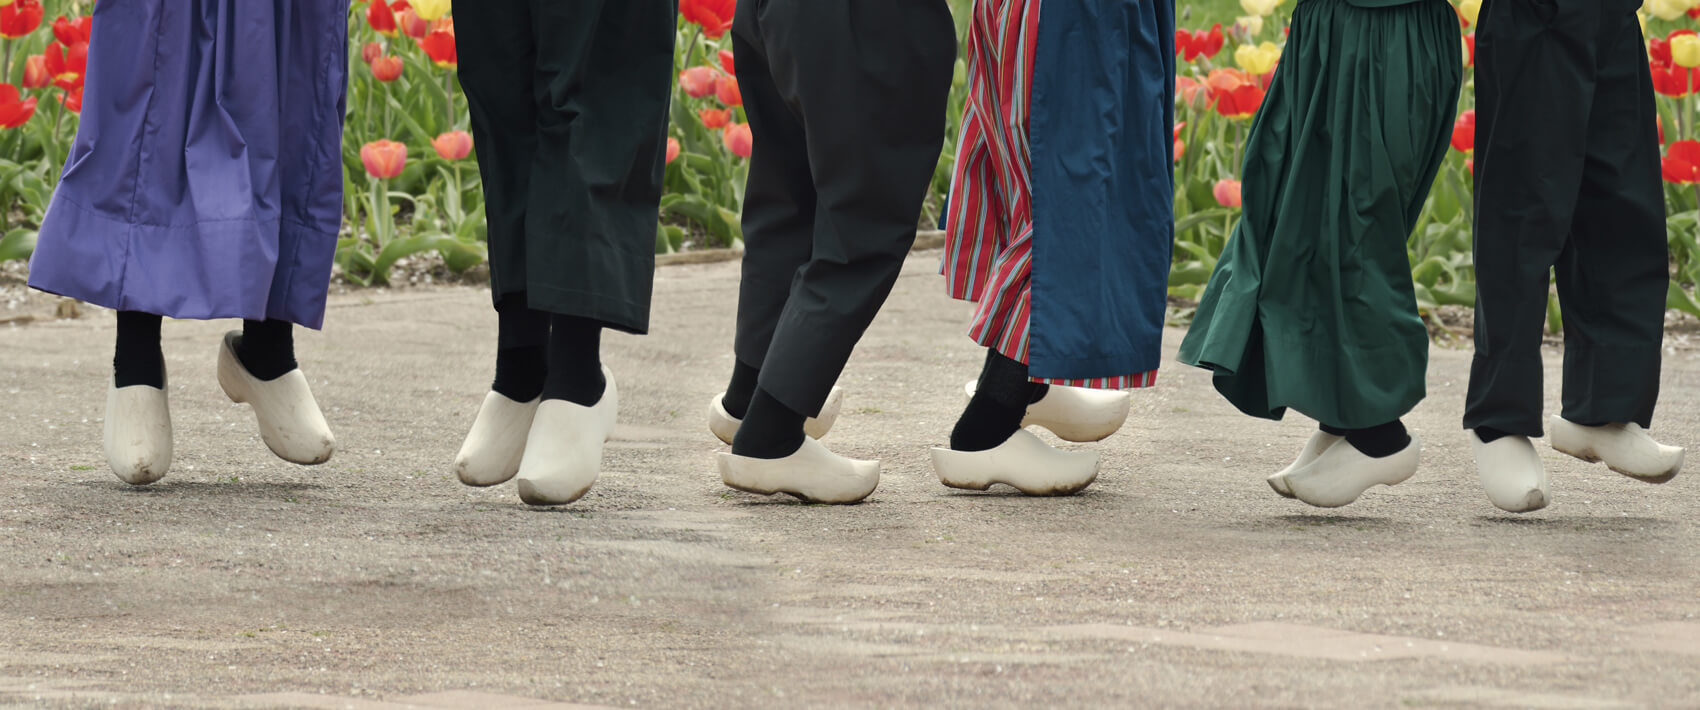 Dutch Wooden Shoes | Discover Holland